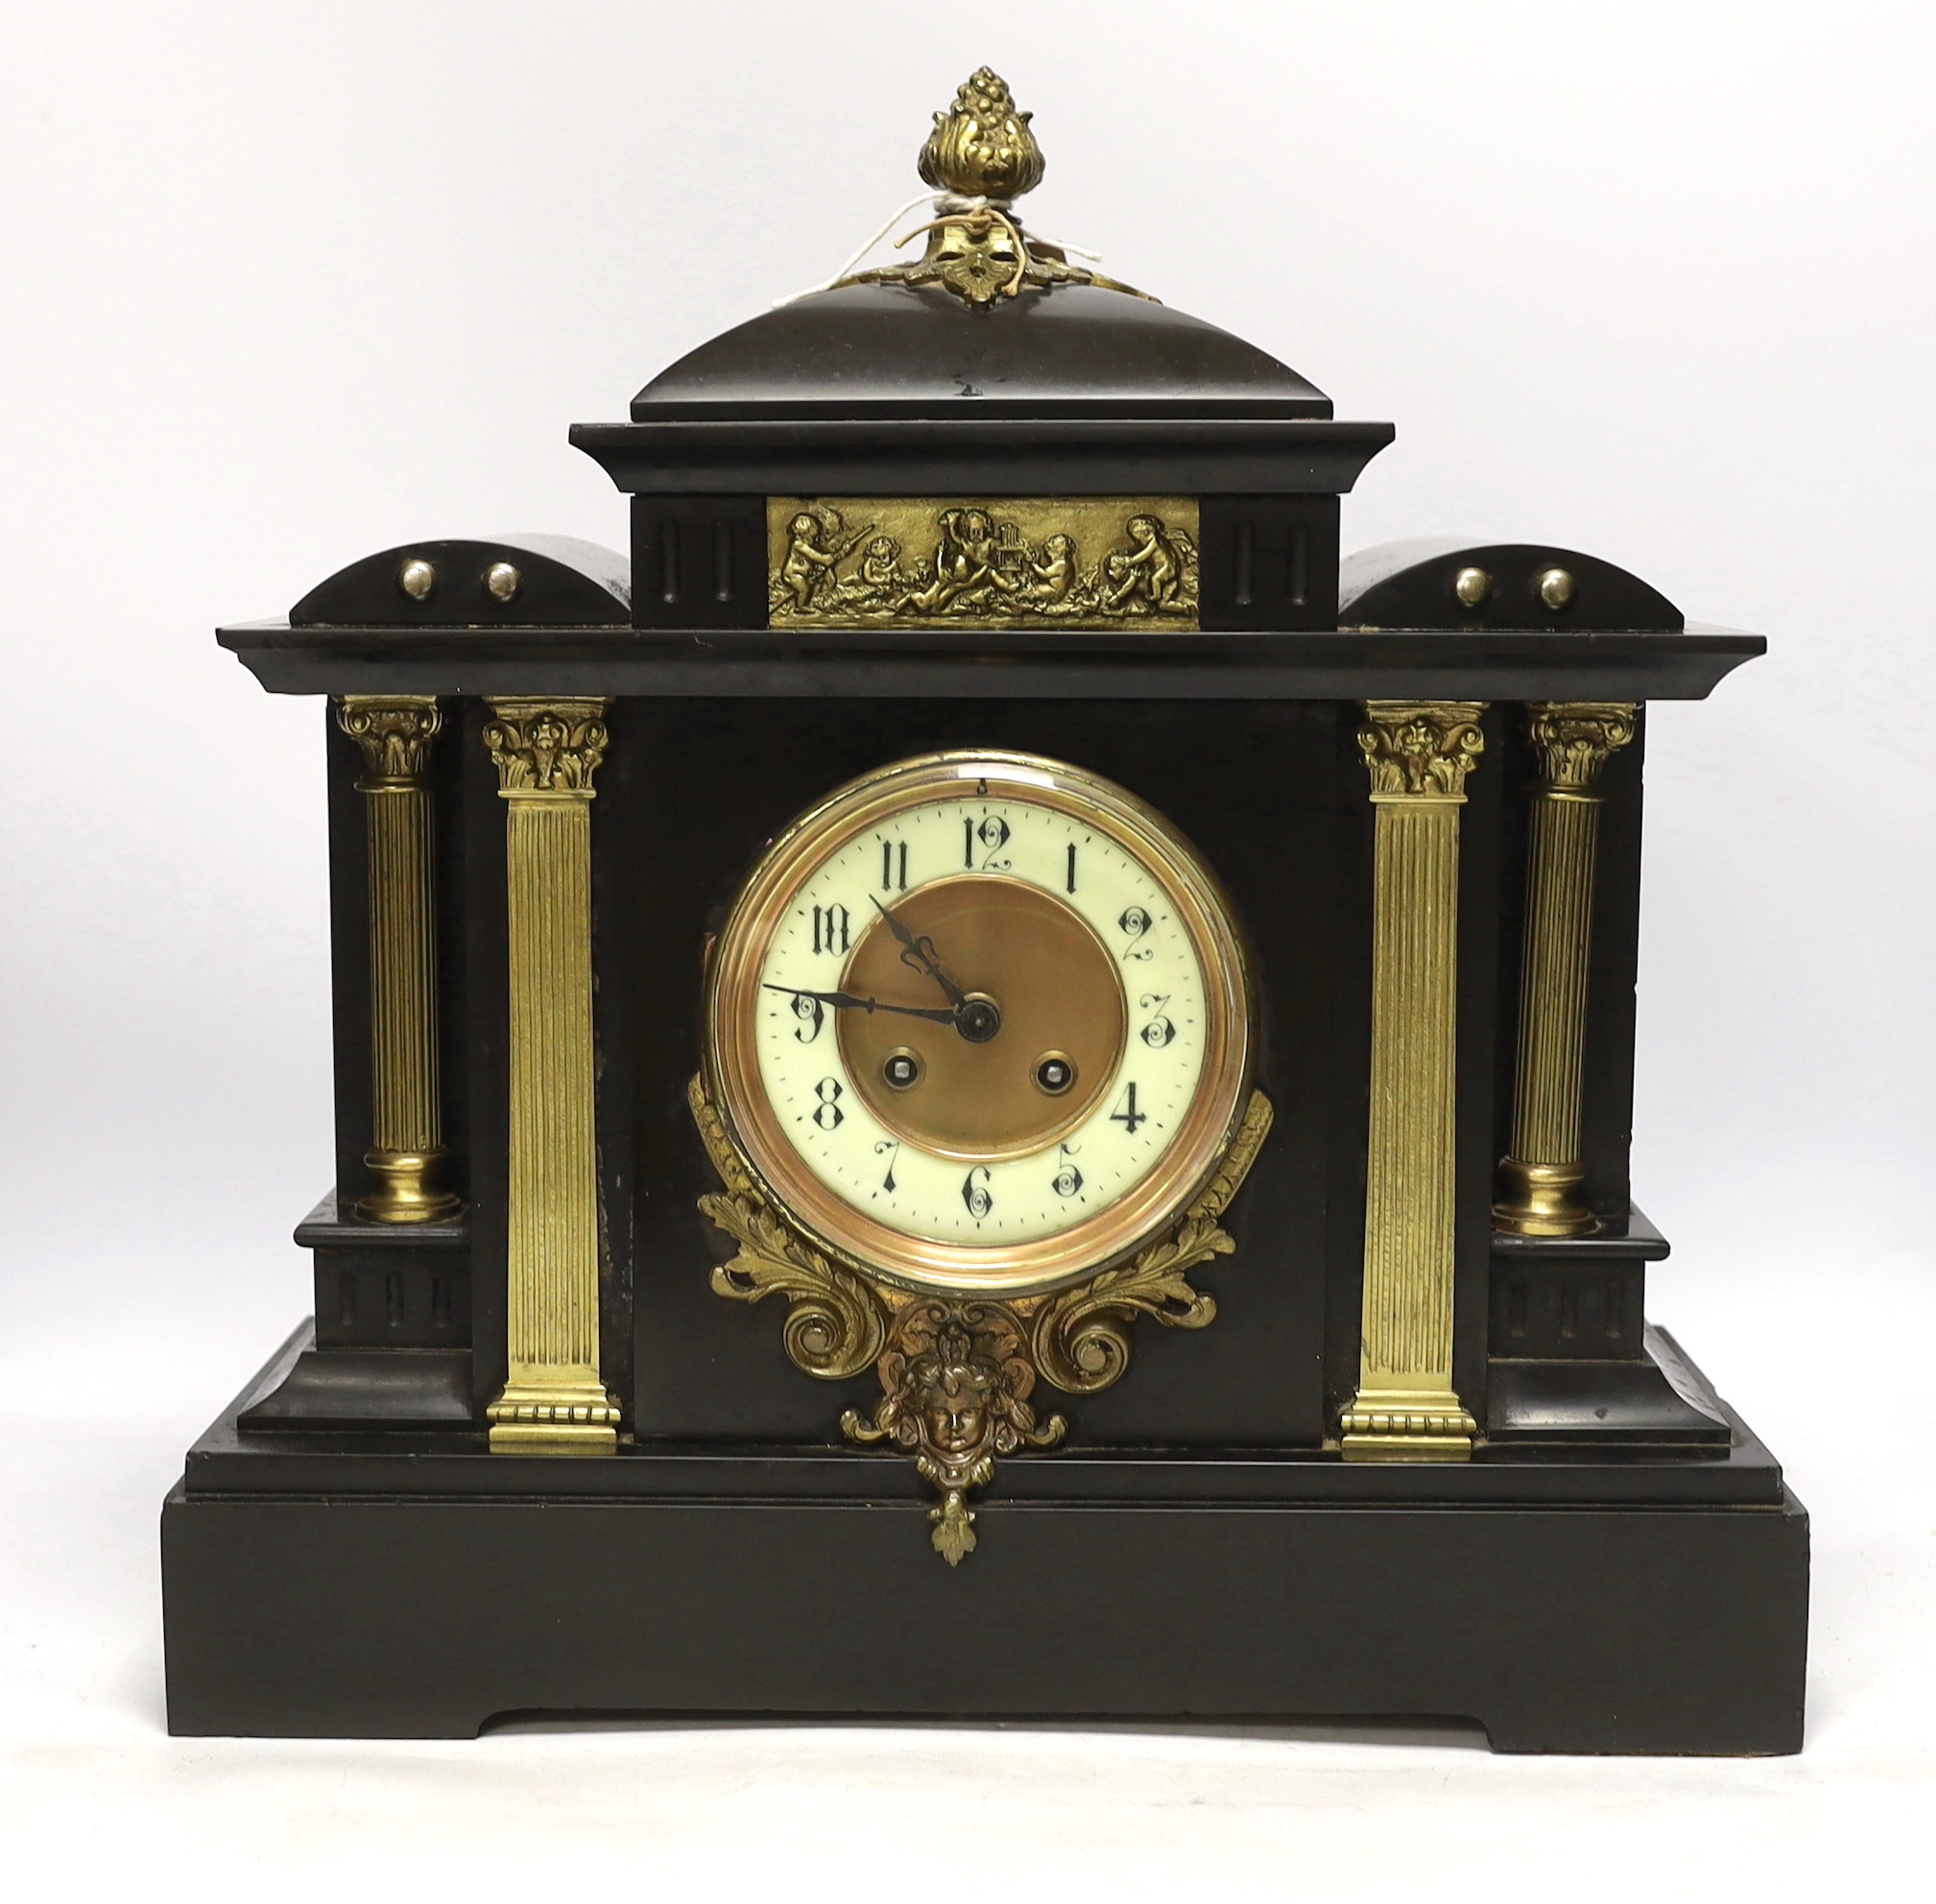 A black slate mantel clock with gilded pillars, striking on a coiled gong, 41cm high